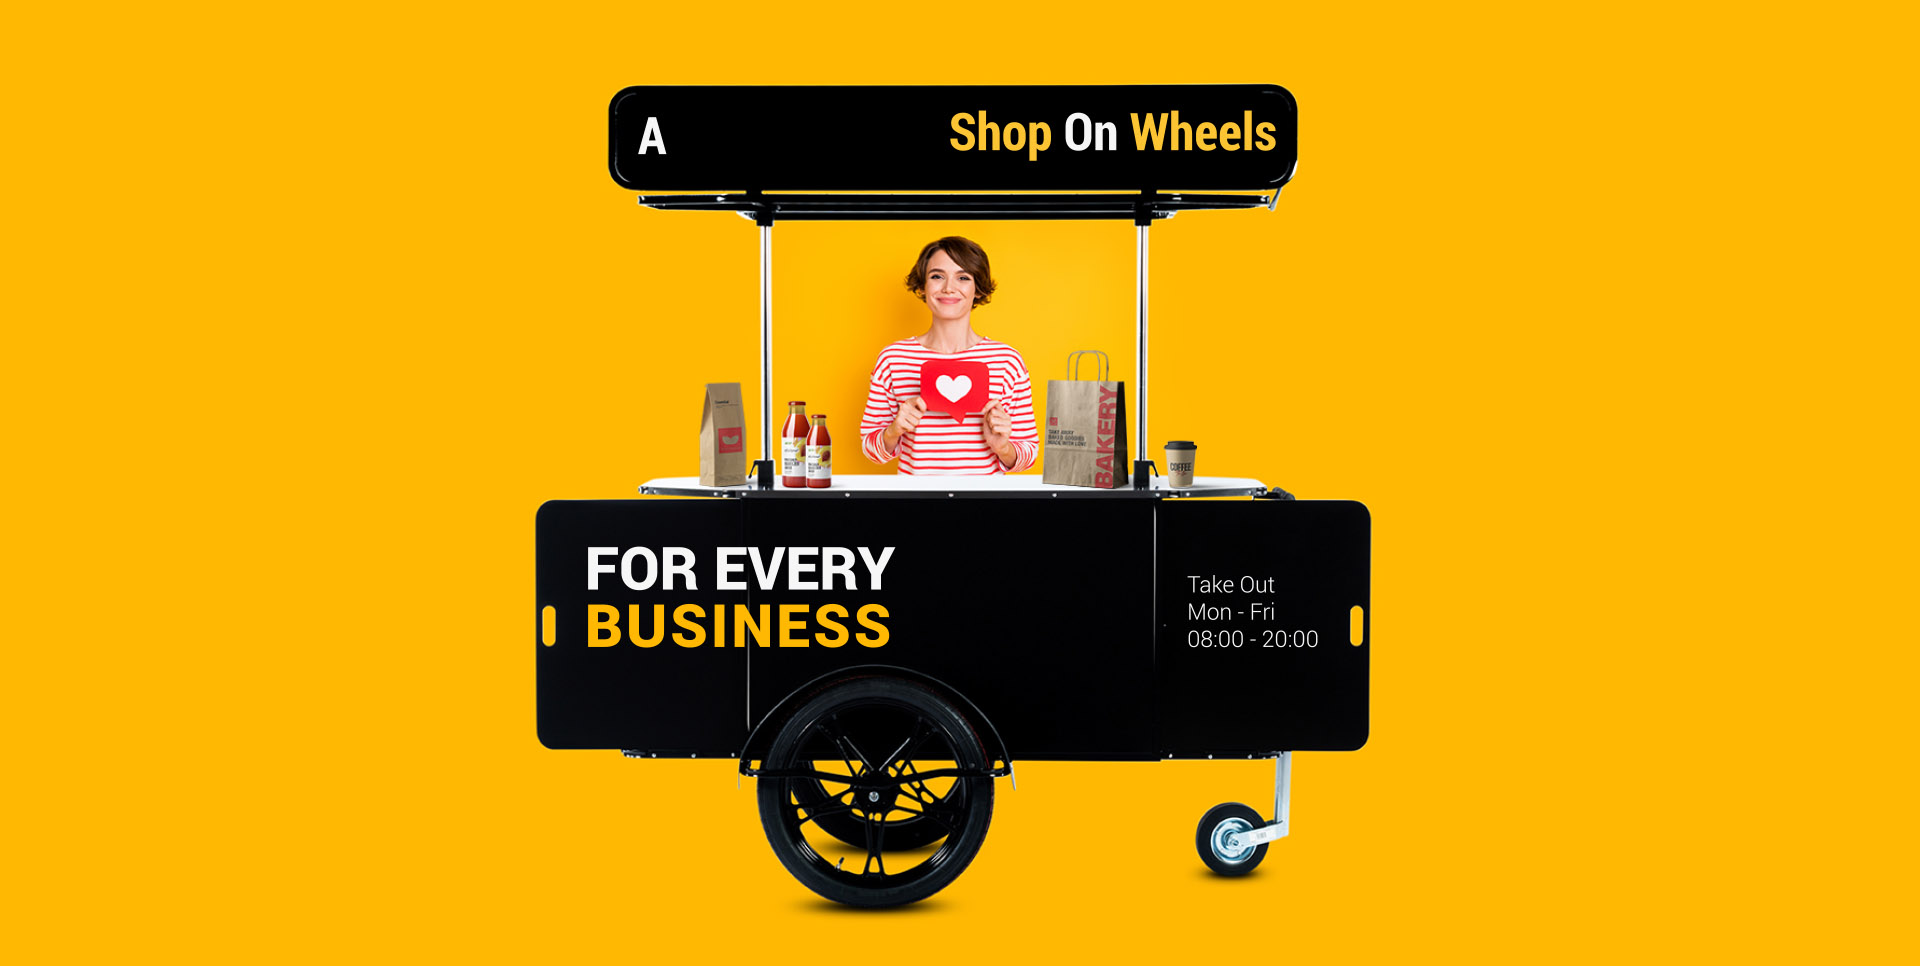 sarkom fødsel Isolere These Mobile Pop Up Shops Can Transform Your Business Overnight